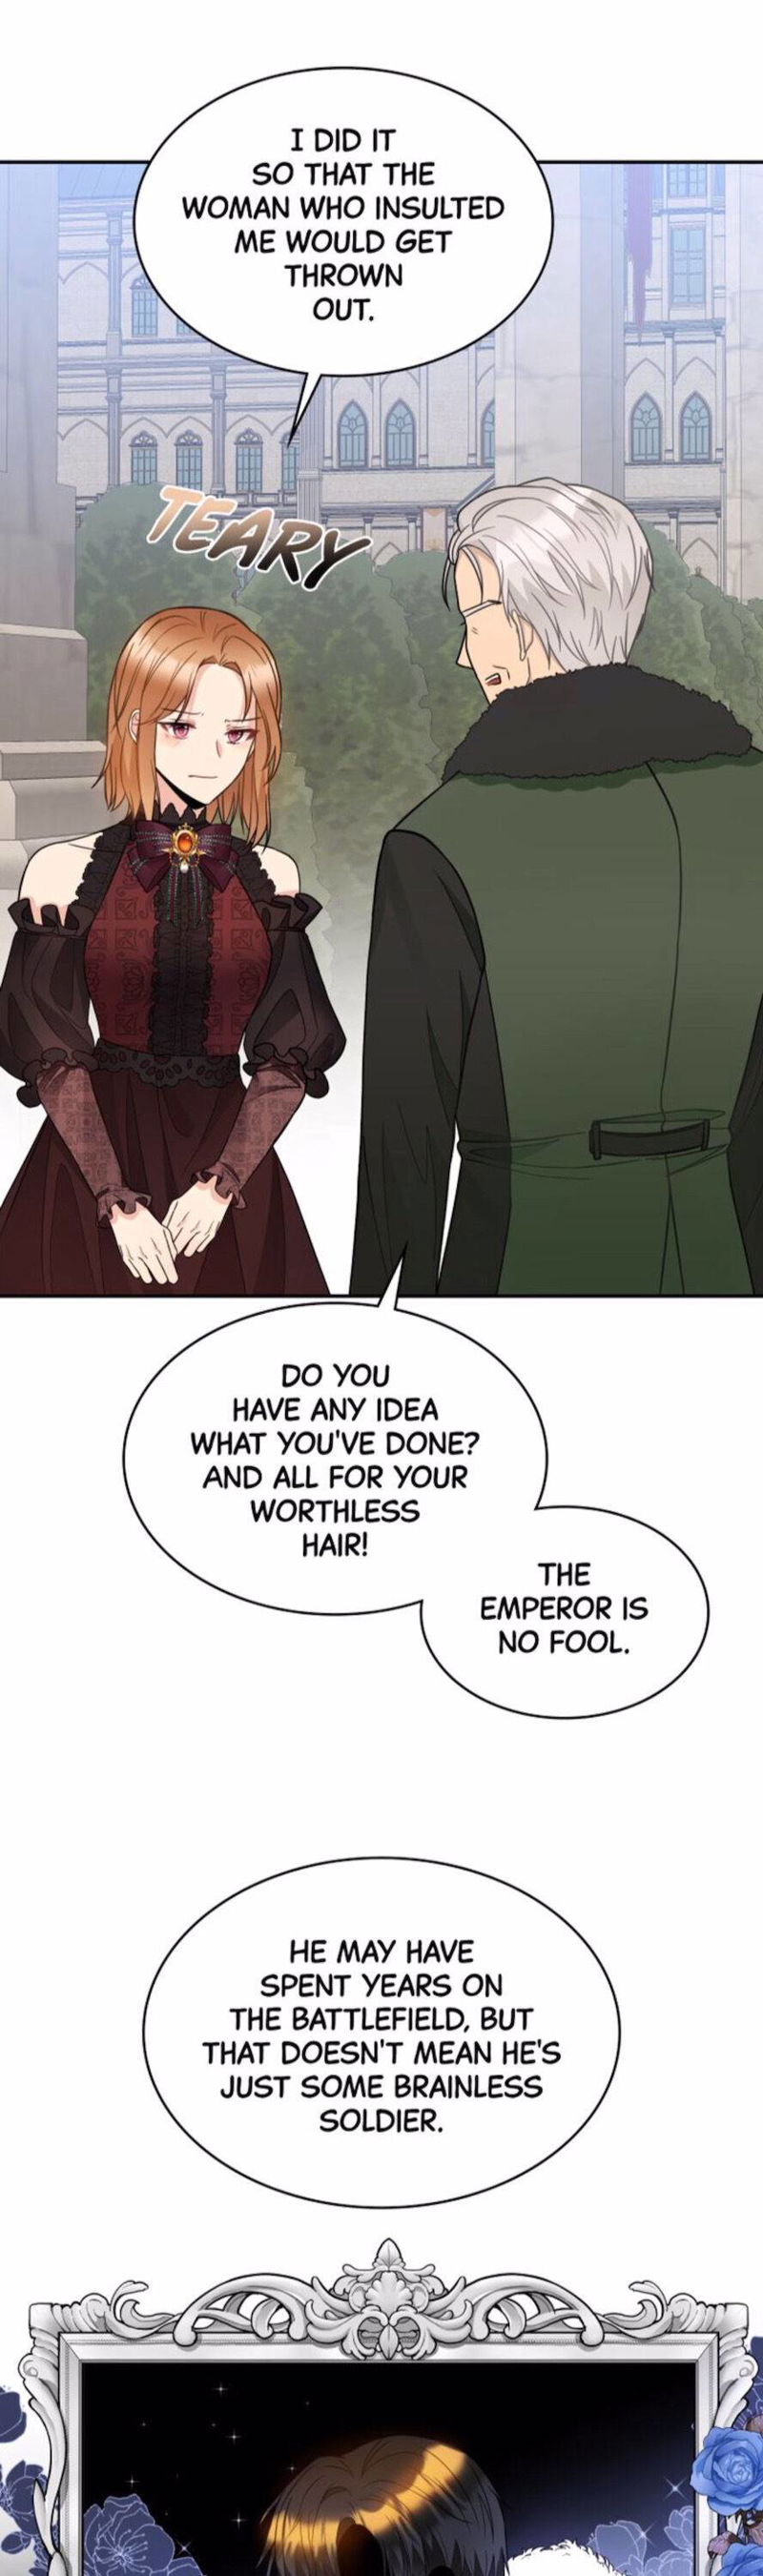 The Emperor’s Mask Chapter 35 page 23